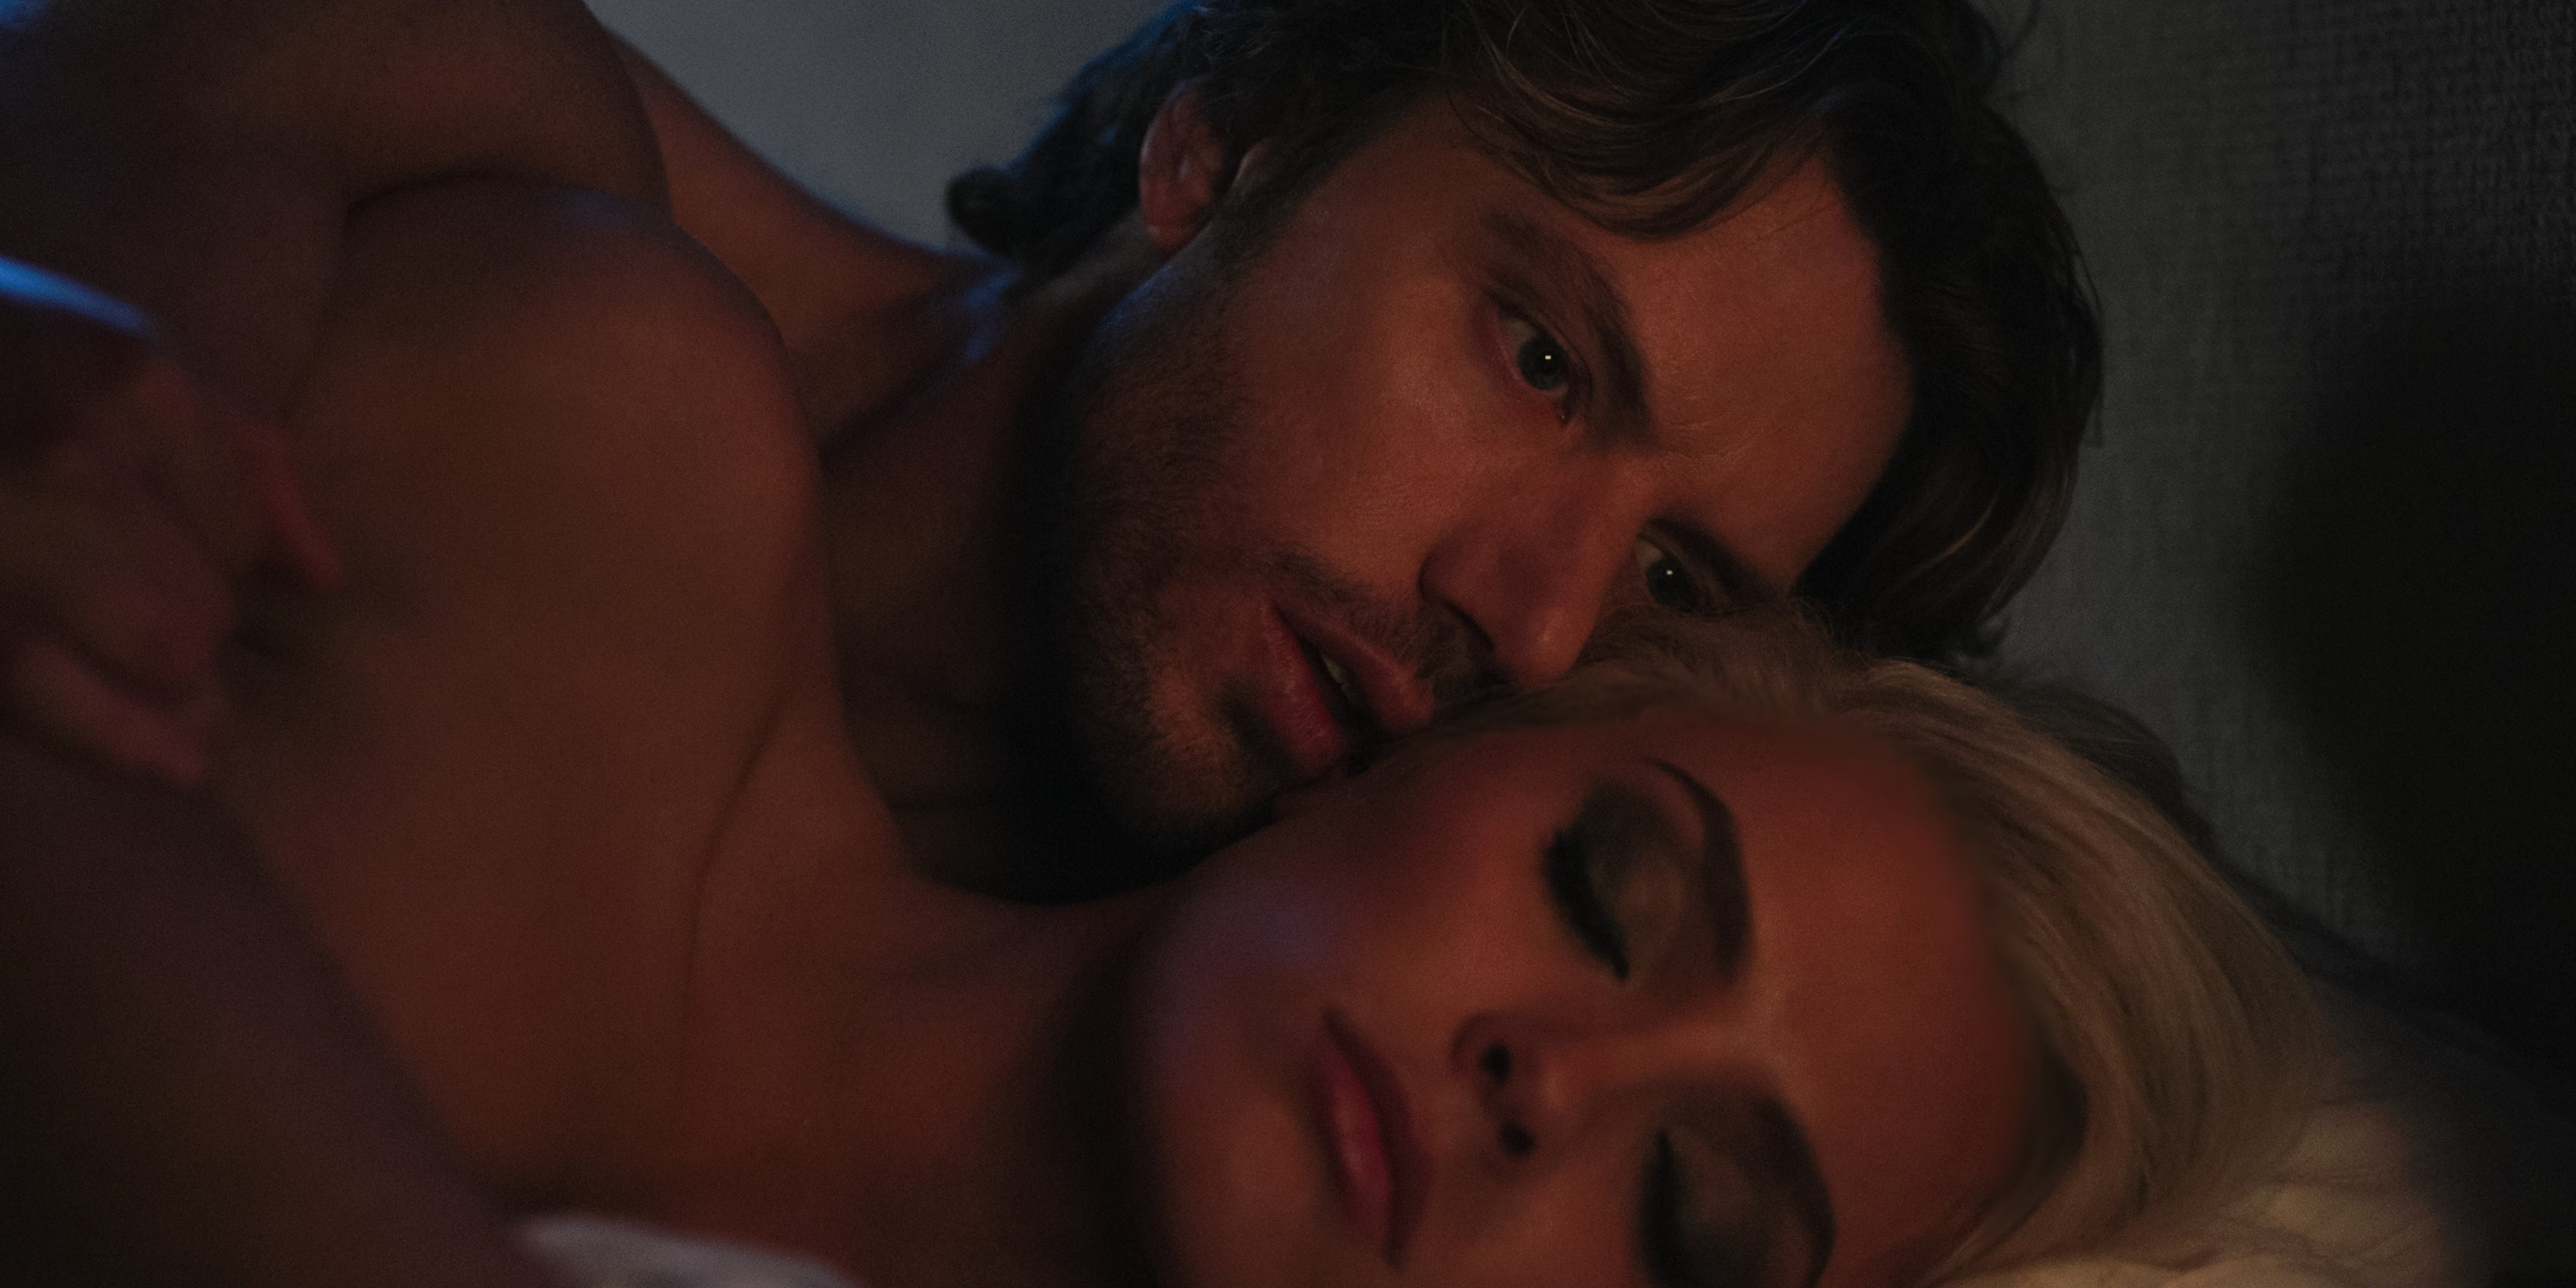 Sex/Life on Netflix Season 2s sex scenes receive a detailed assessment. image